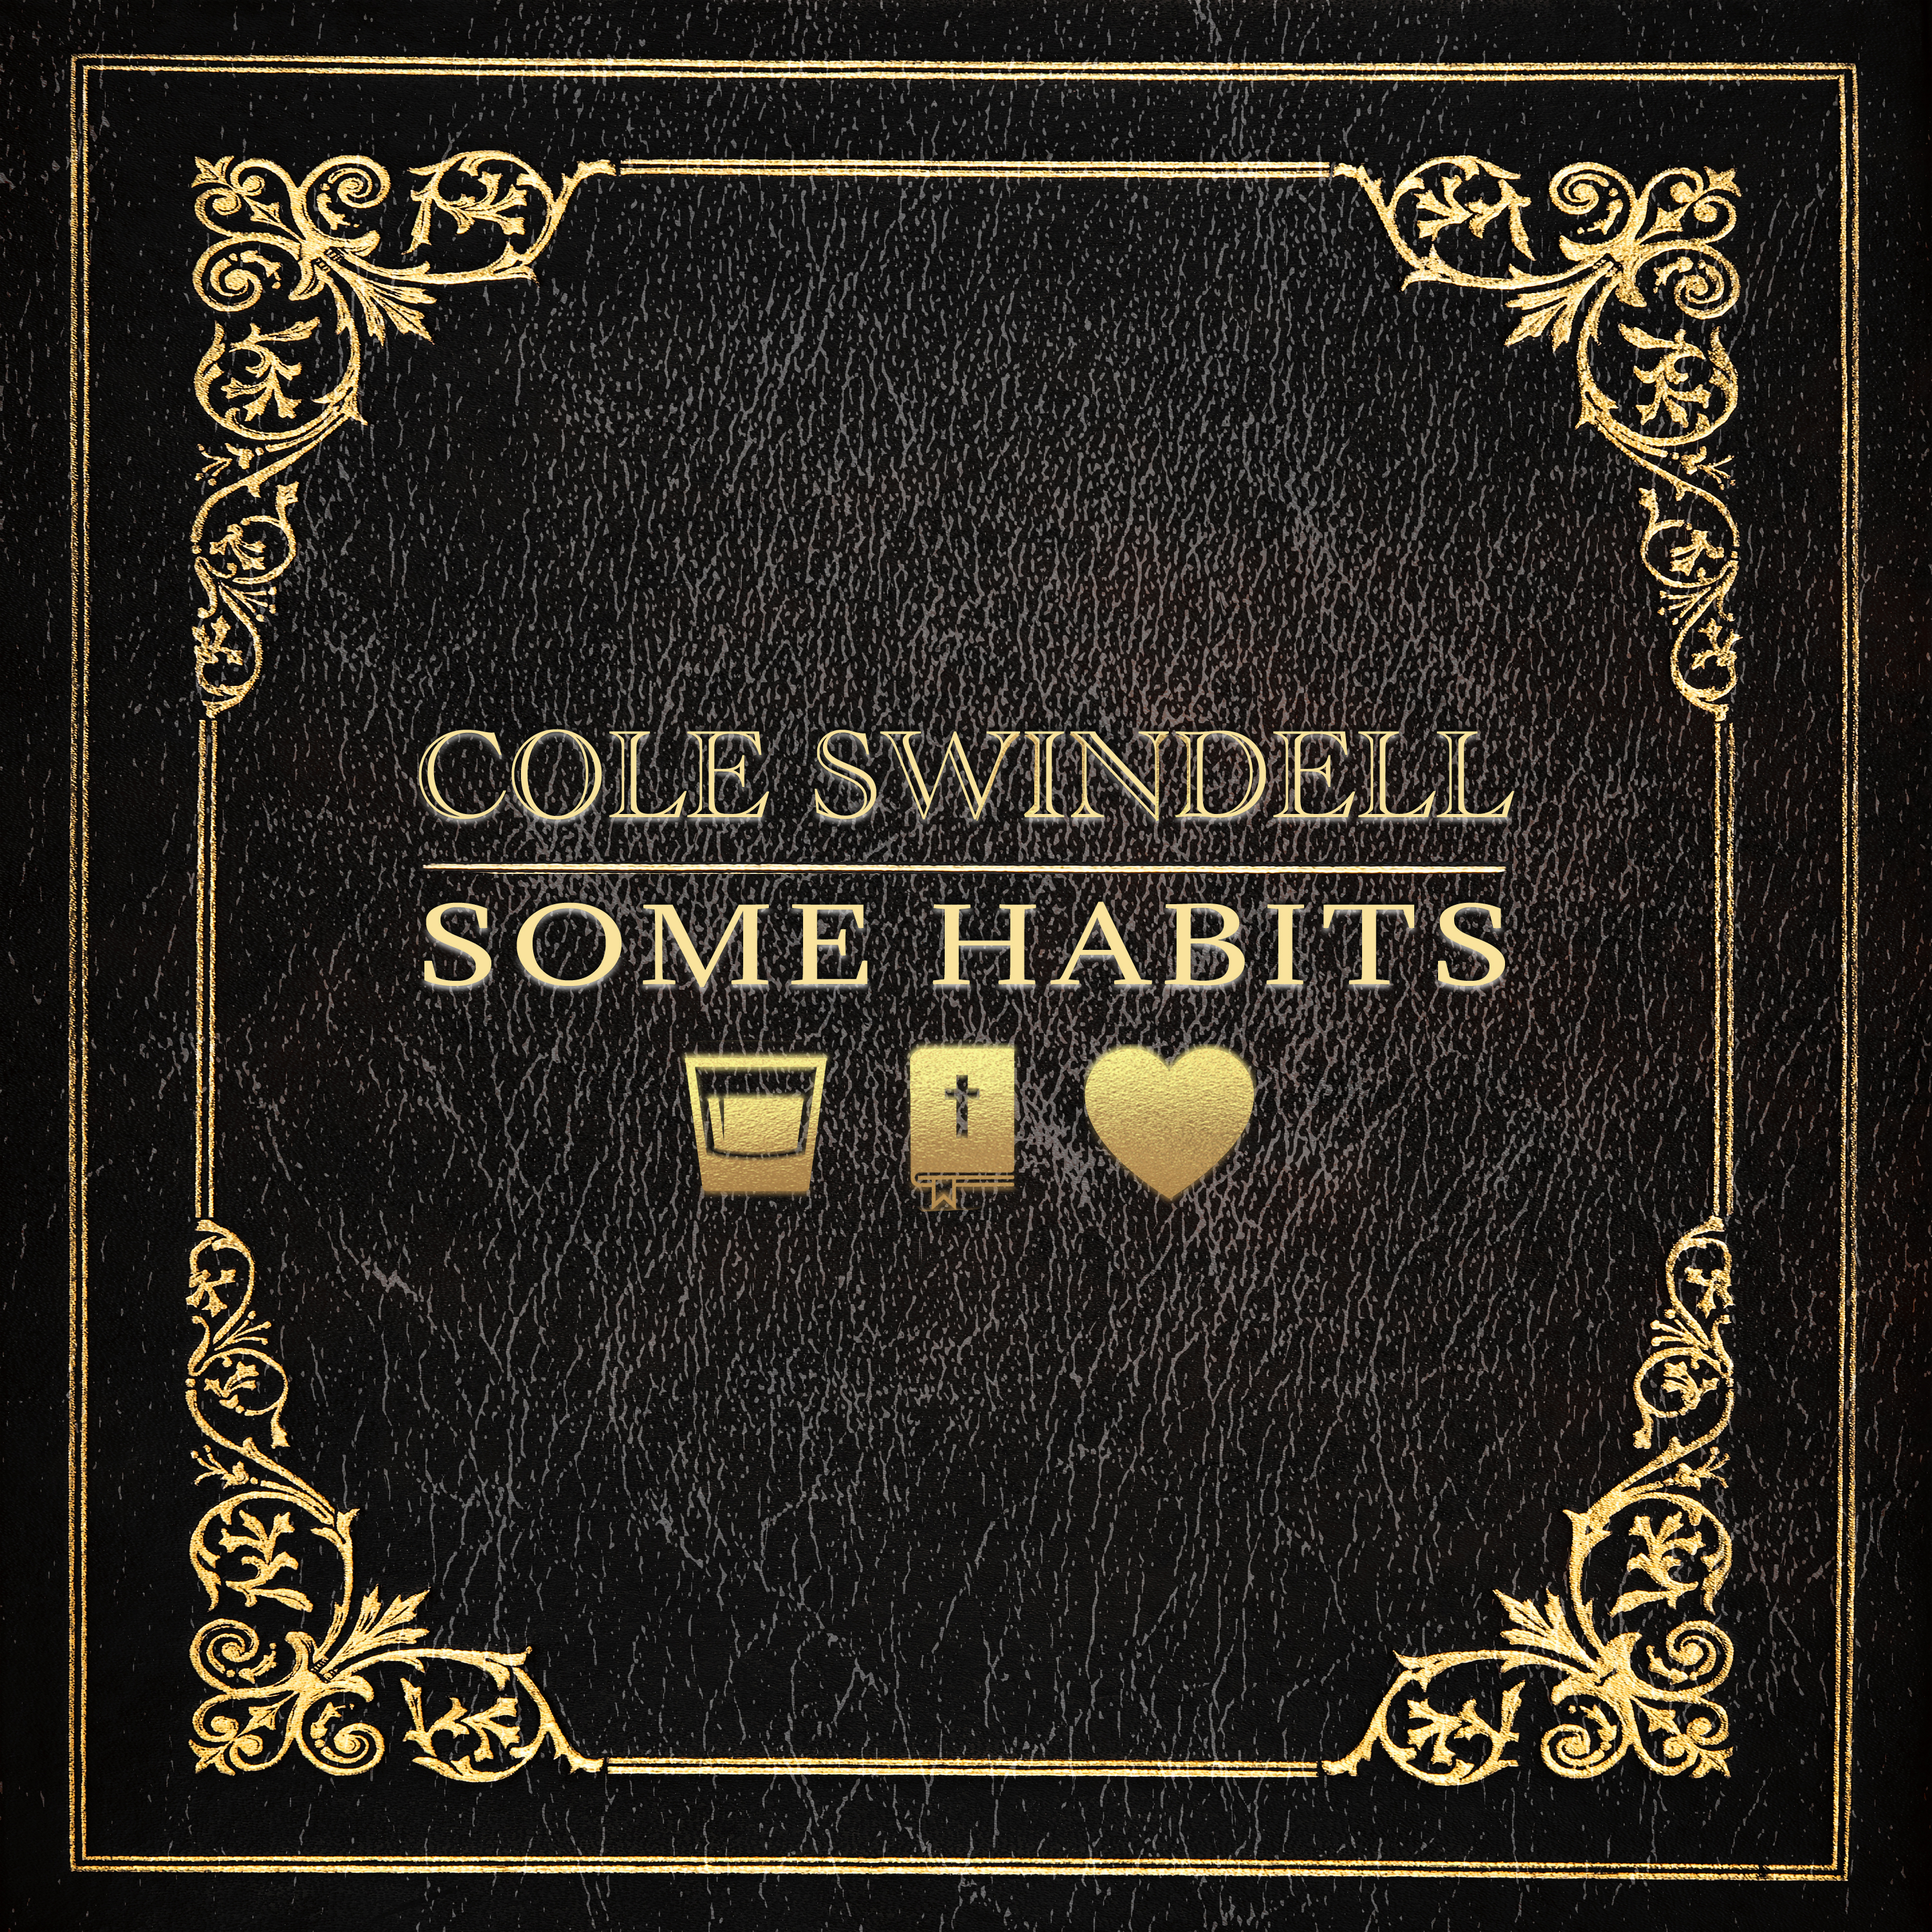 COLE SWINDELL RELEASES NEW SONG AND VIDEO TODAY "SOME HABITS"